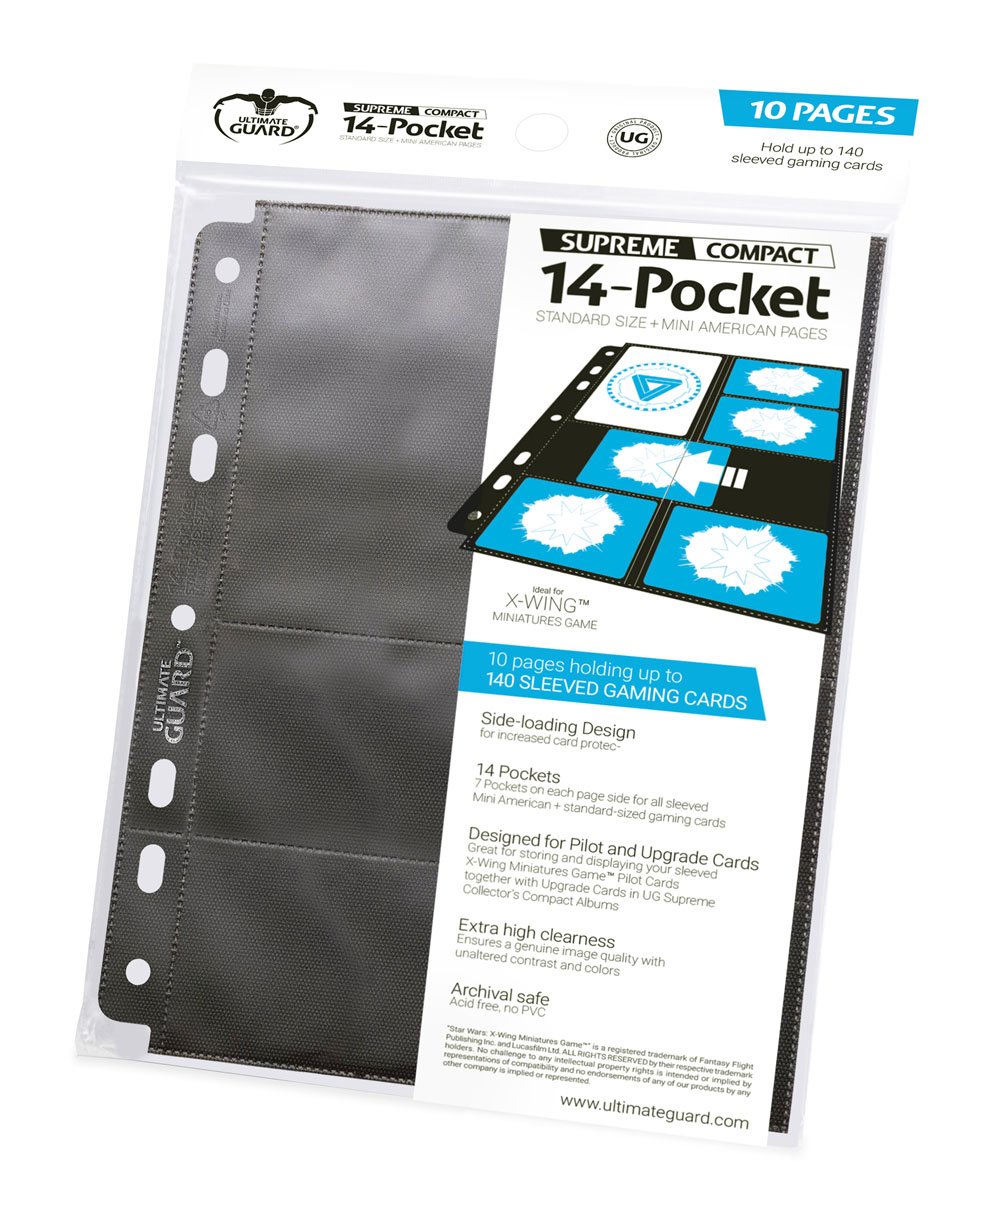 ULTIMATE GUARD 14-Pocket Compact Pages taille standard & Mini American Noir (10)